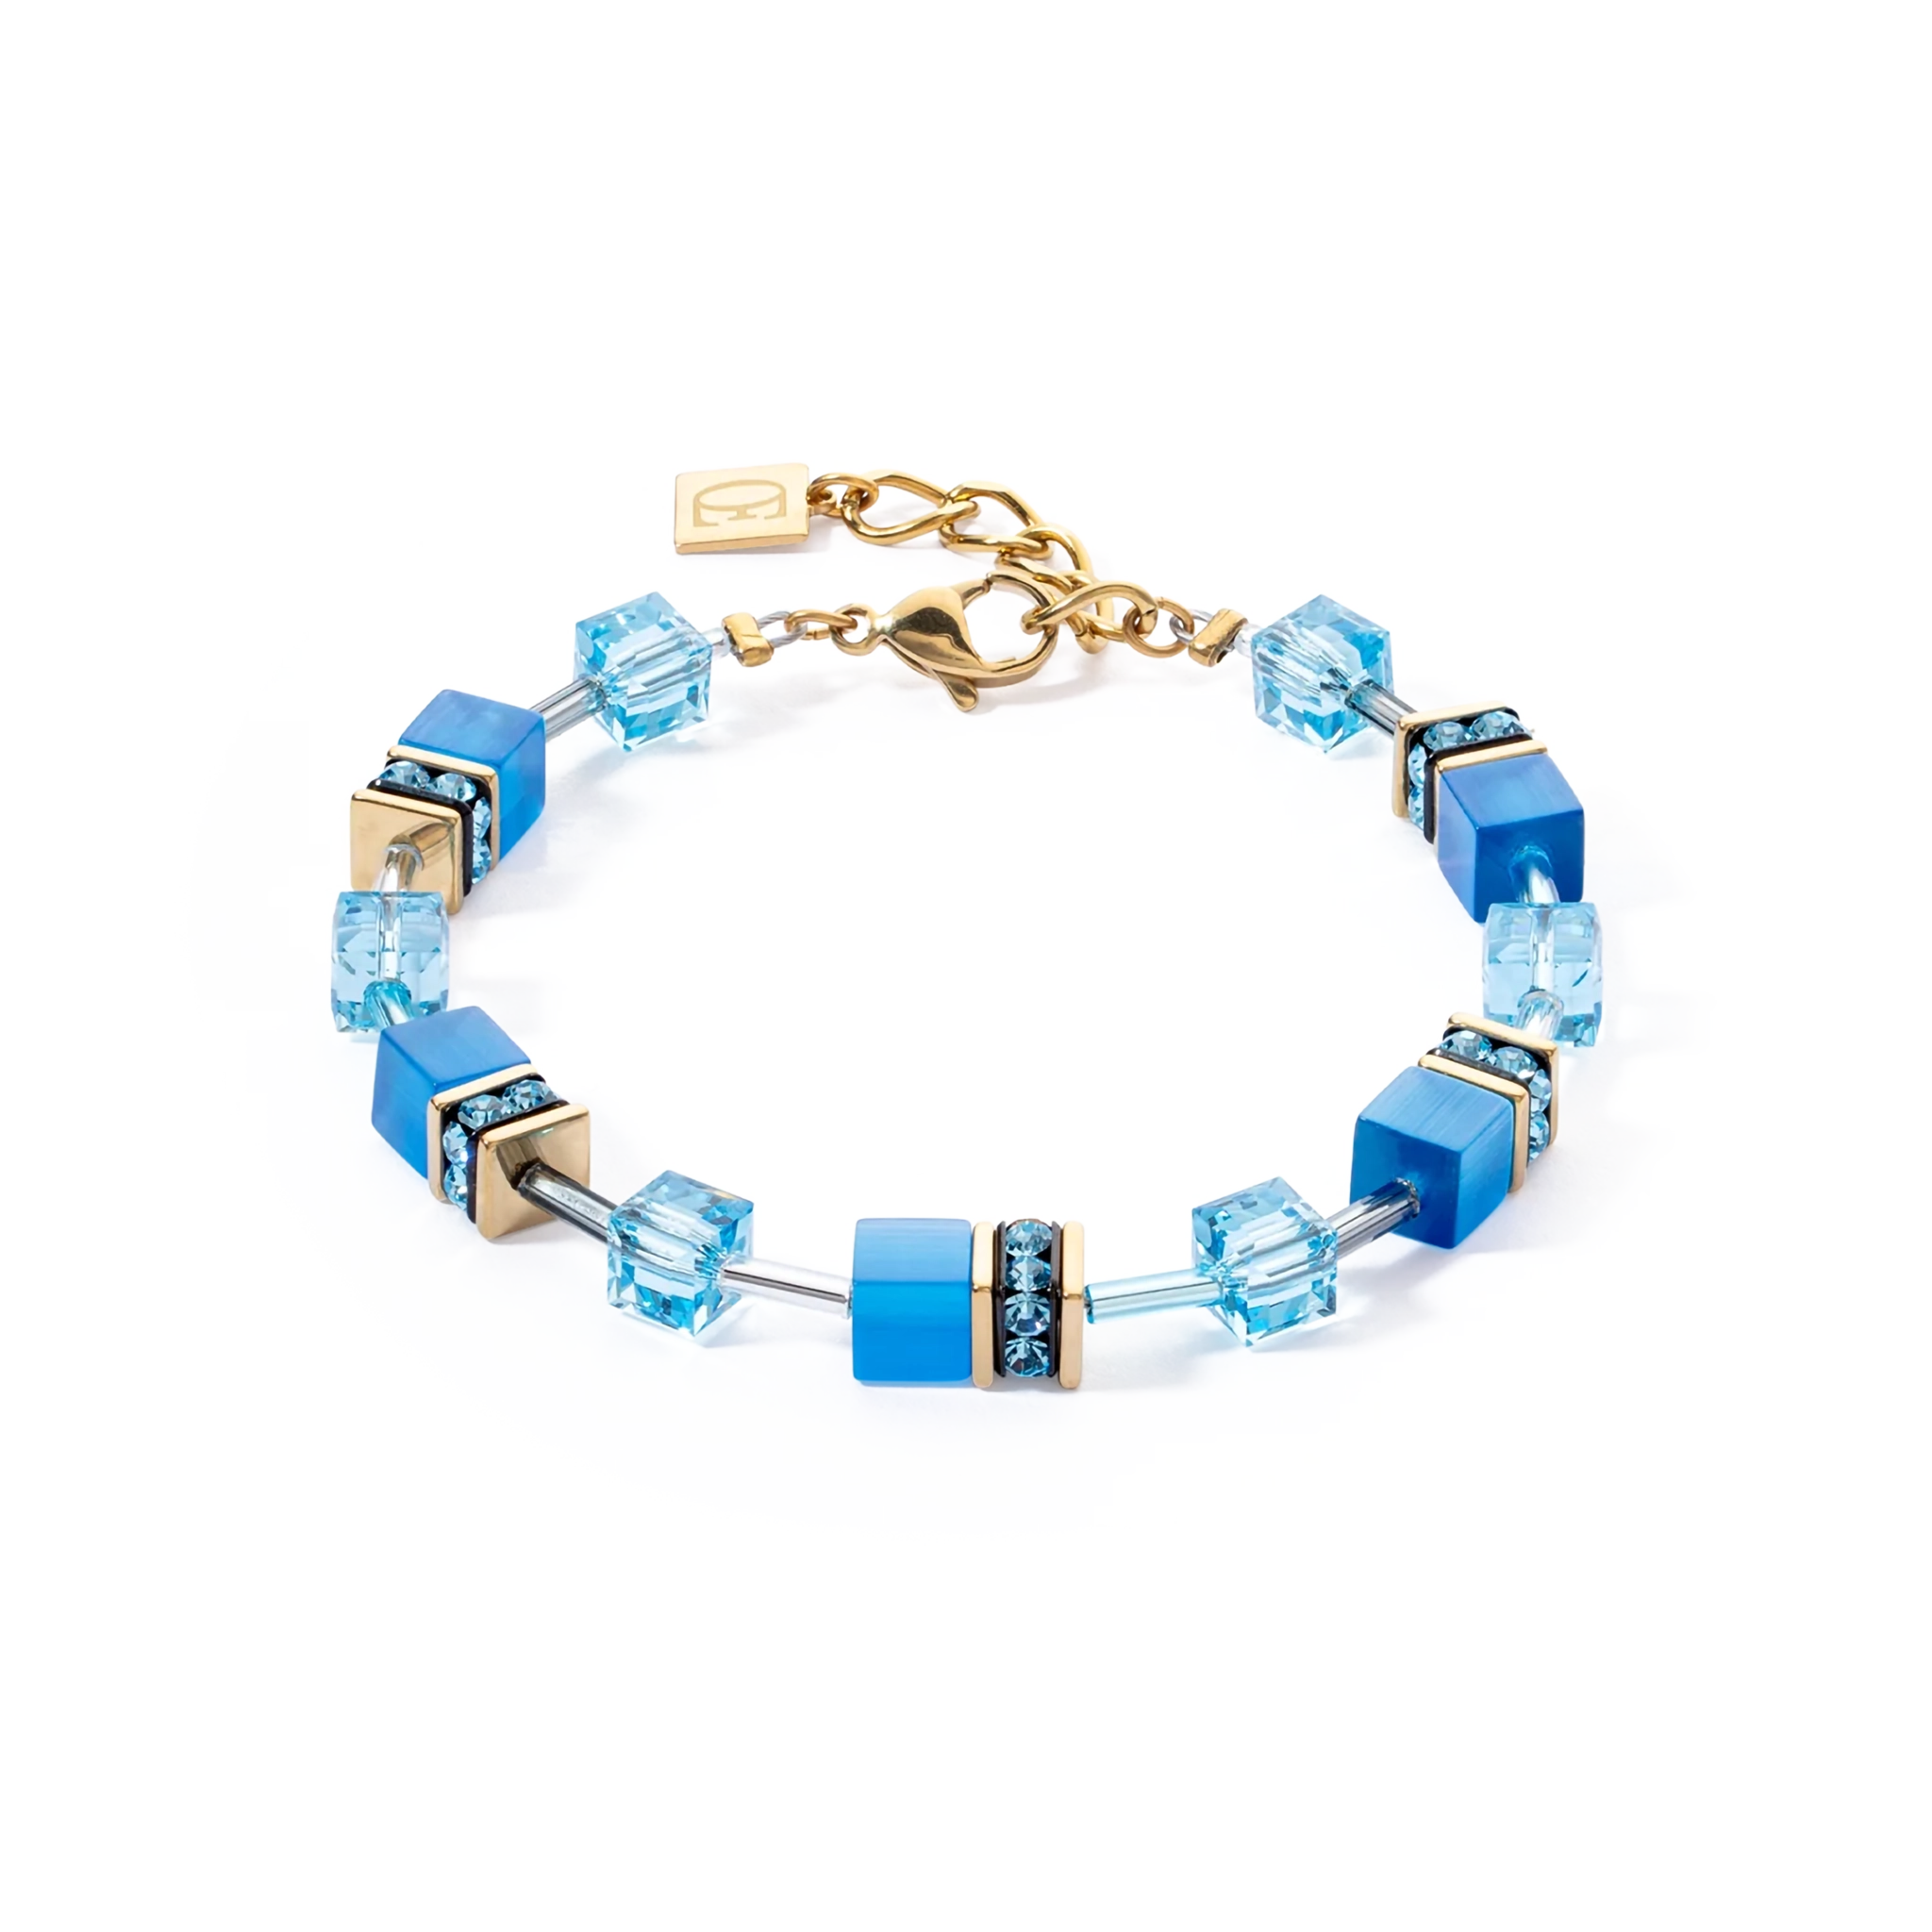 A bracelet in gold steel with blue cube stones and beads